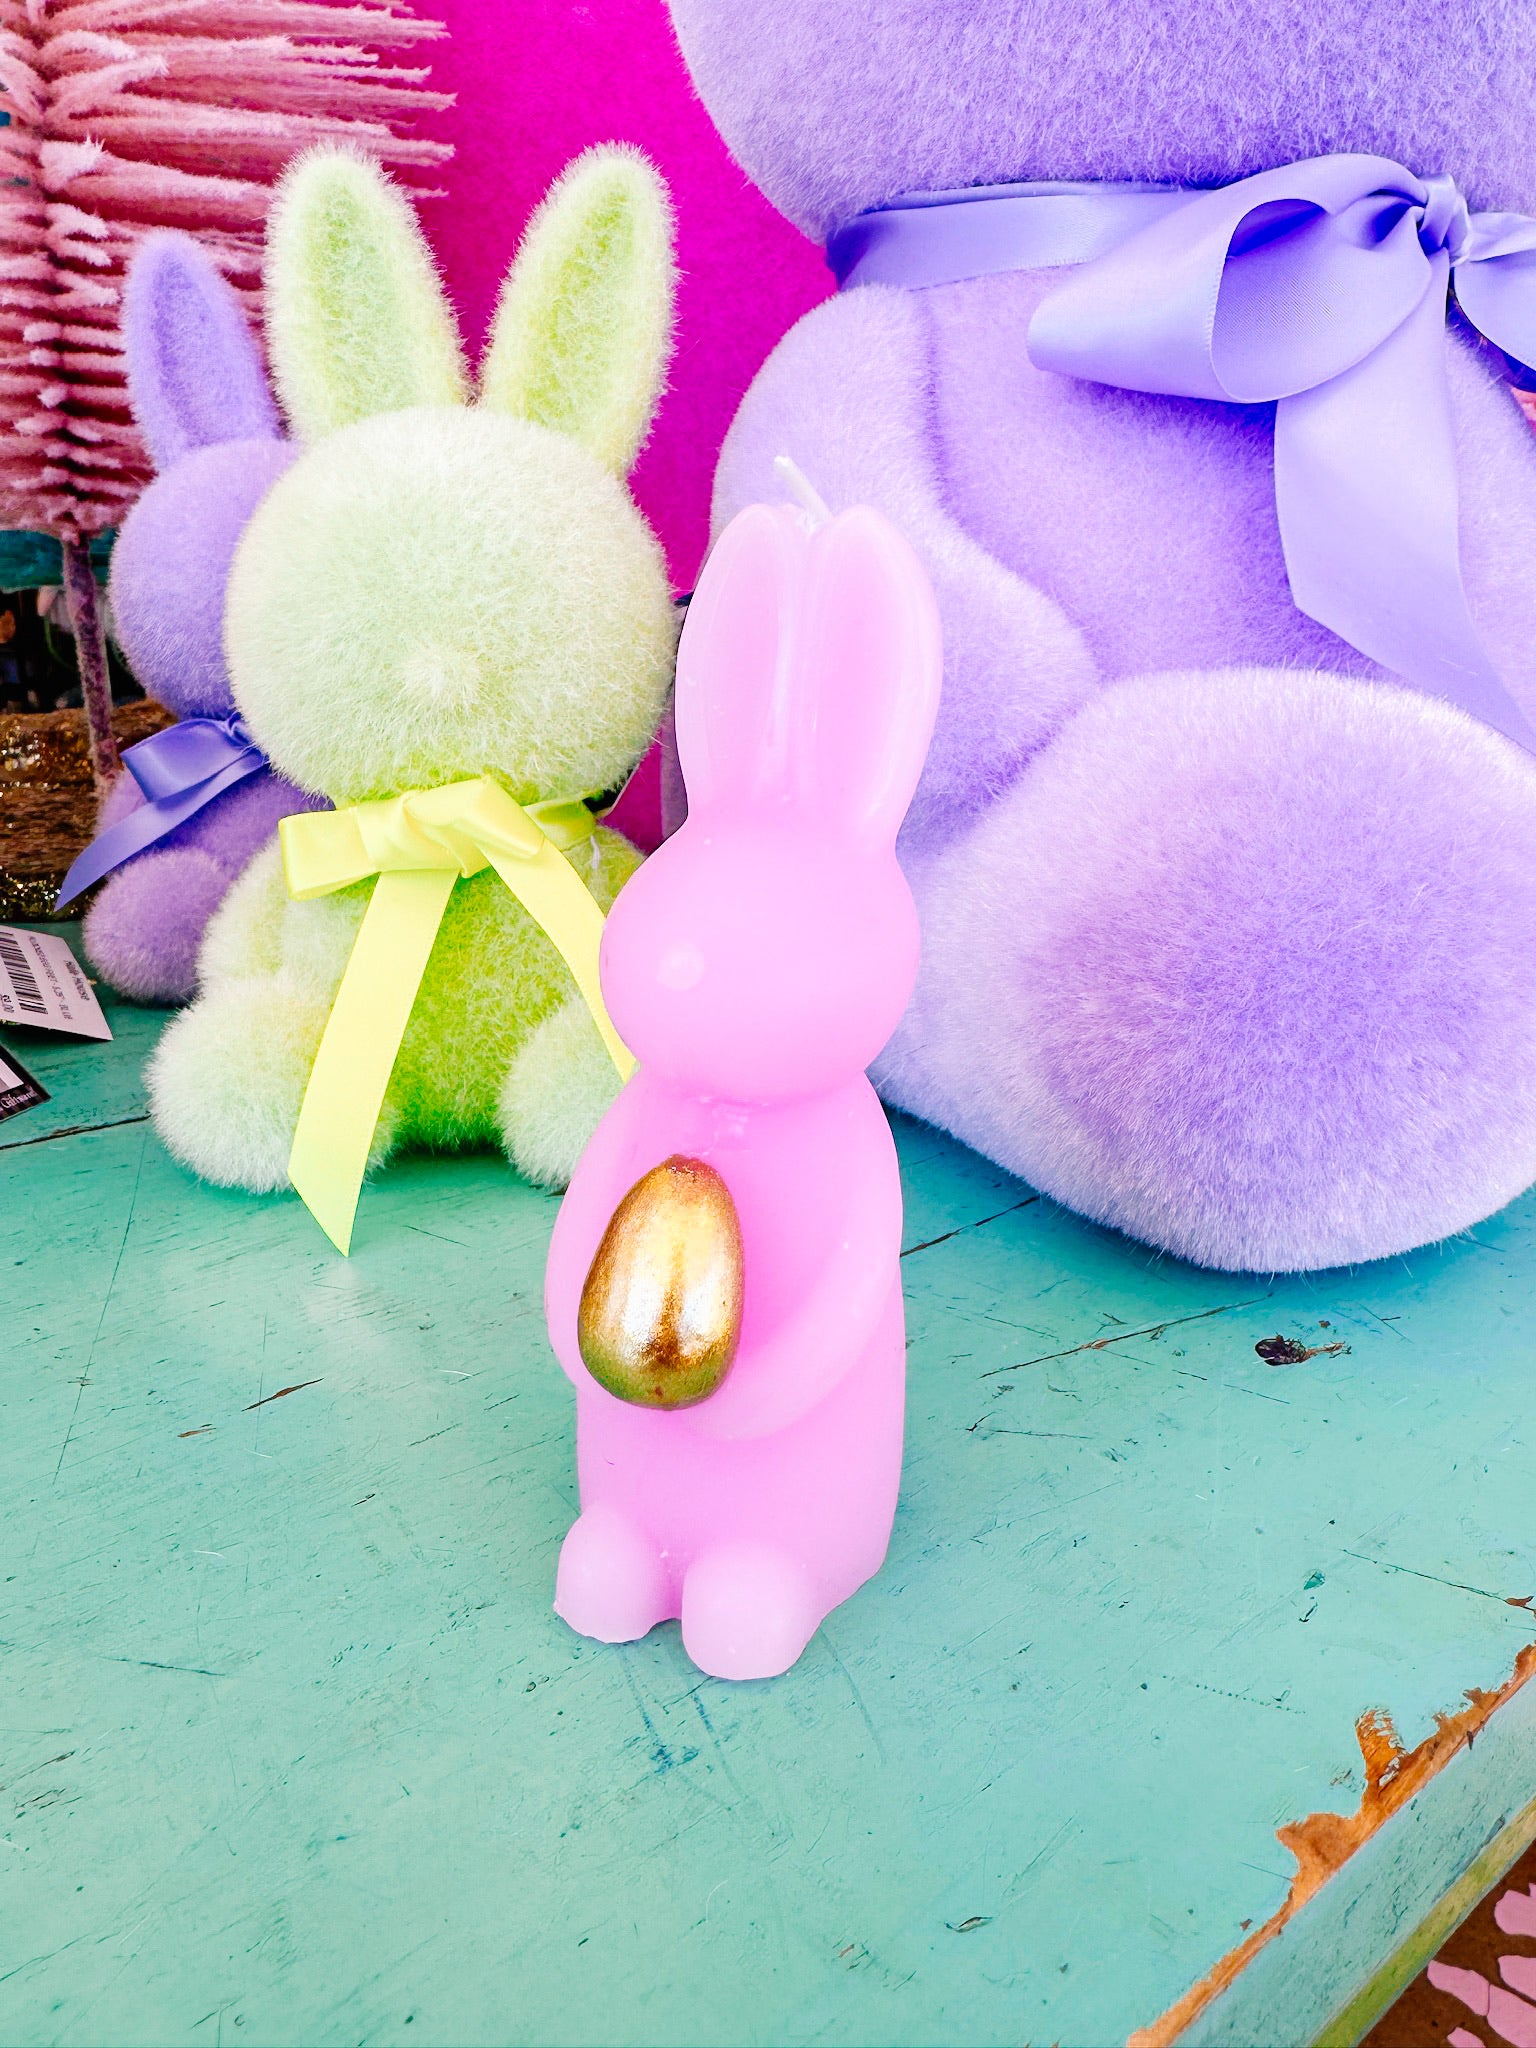 BUNNY GOLDEN EGG CANDLE - 6.25"